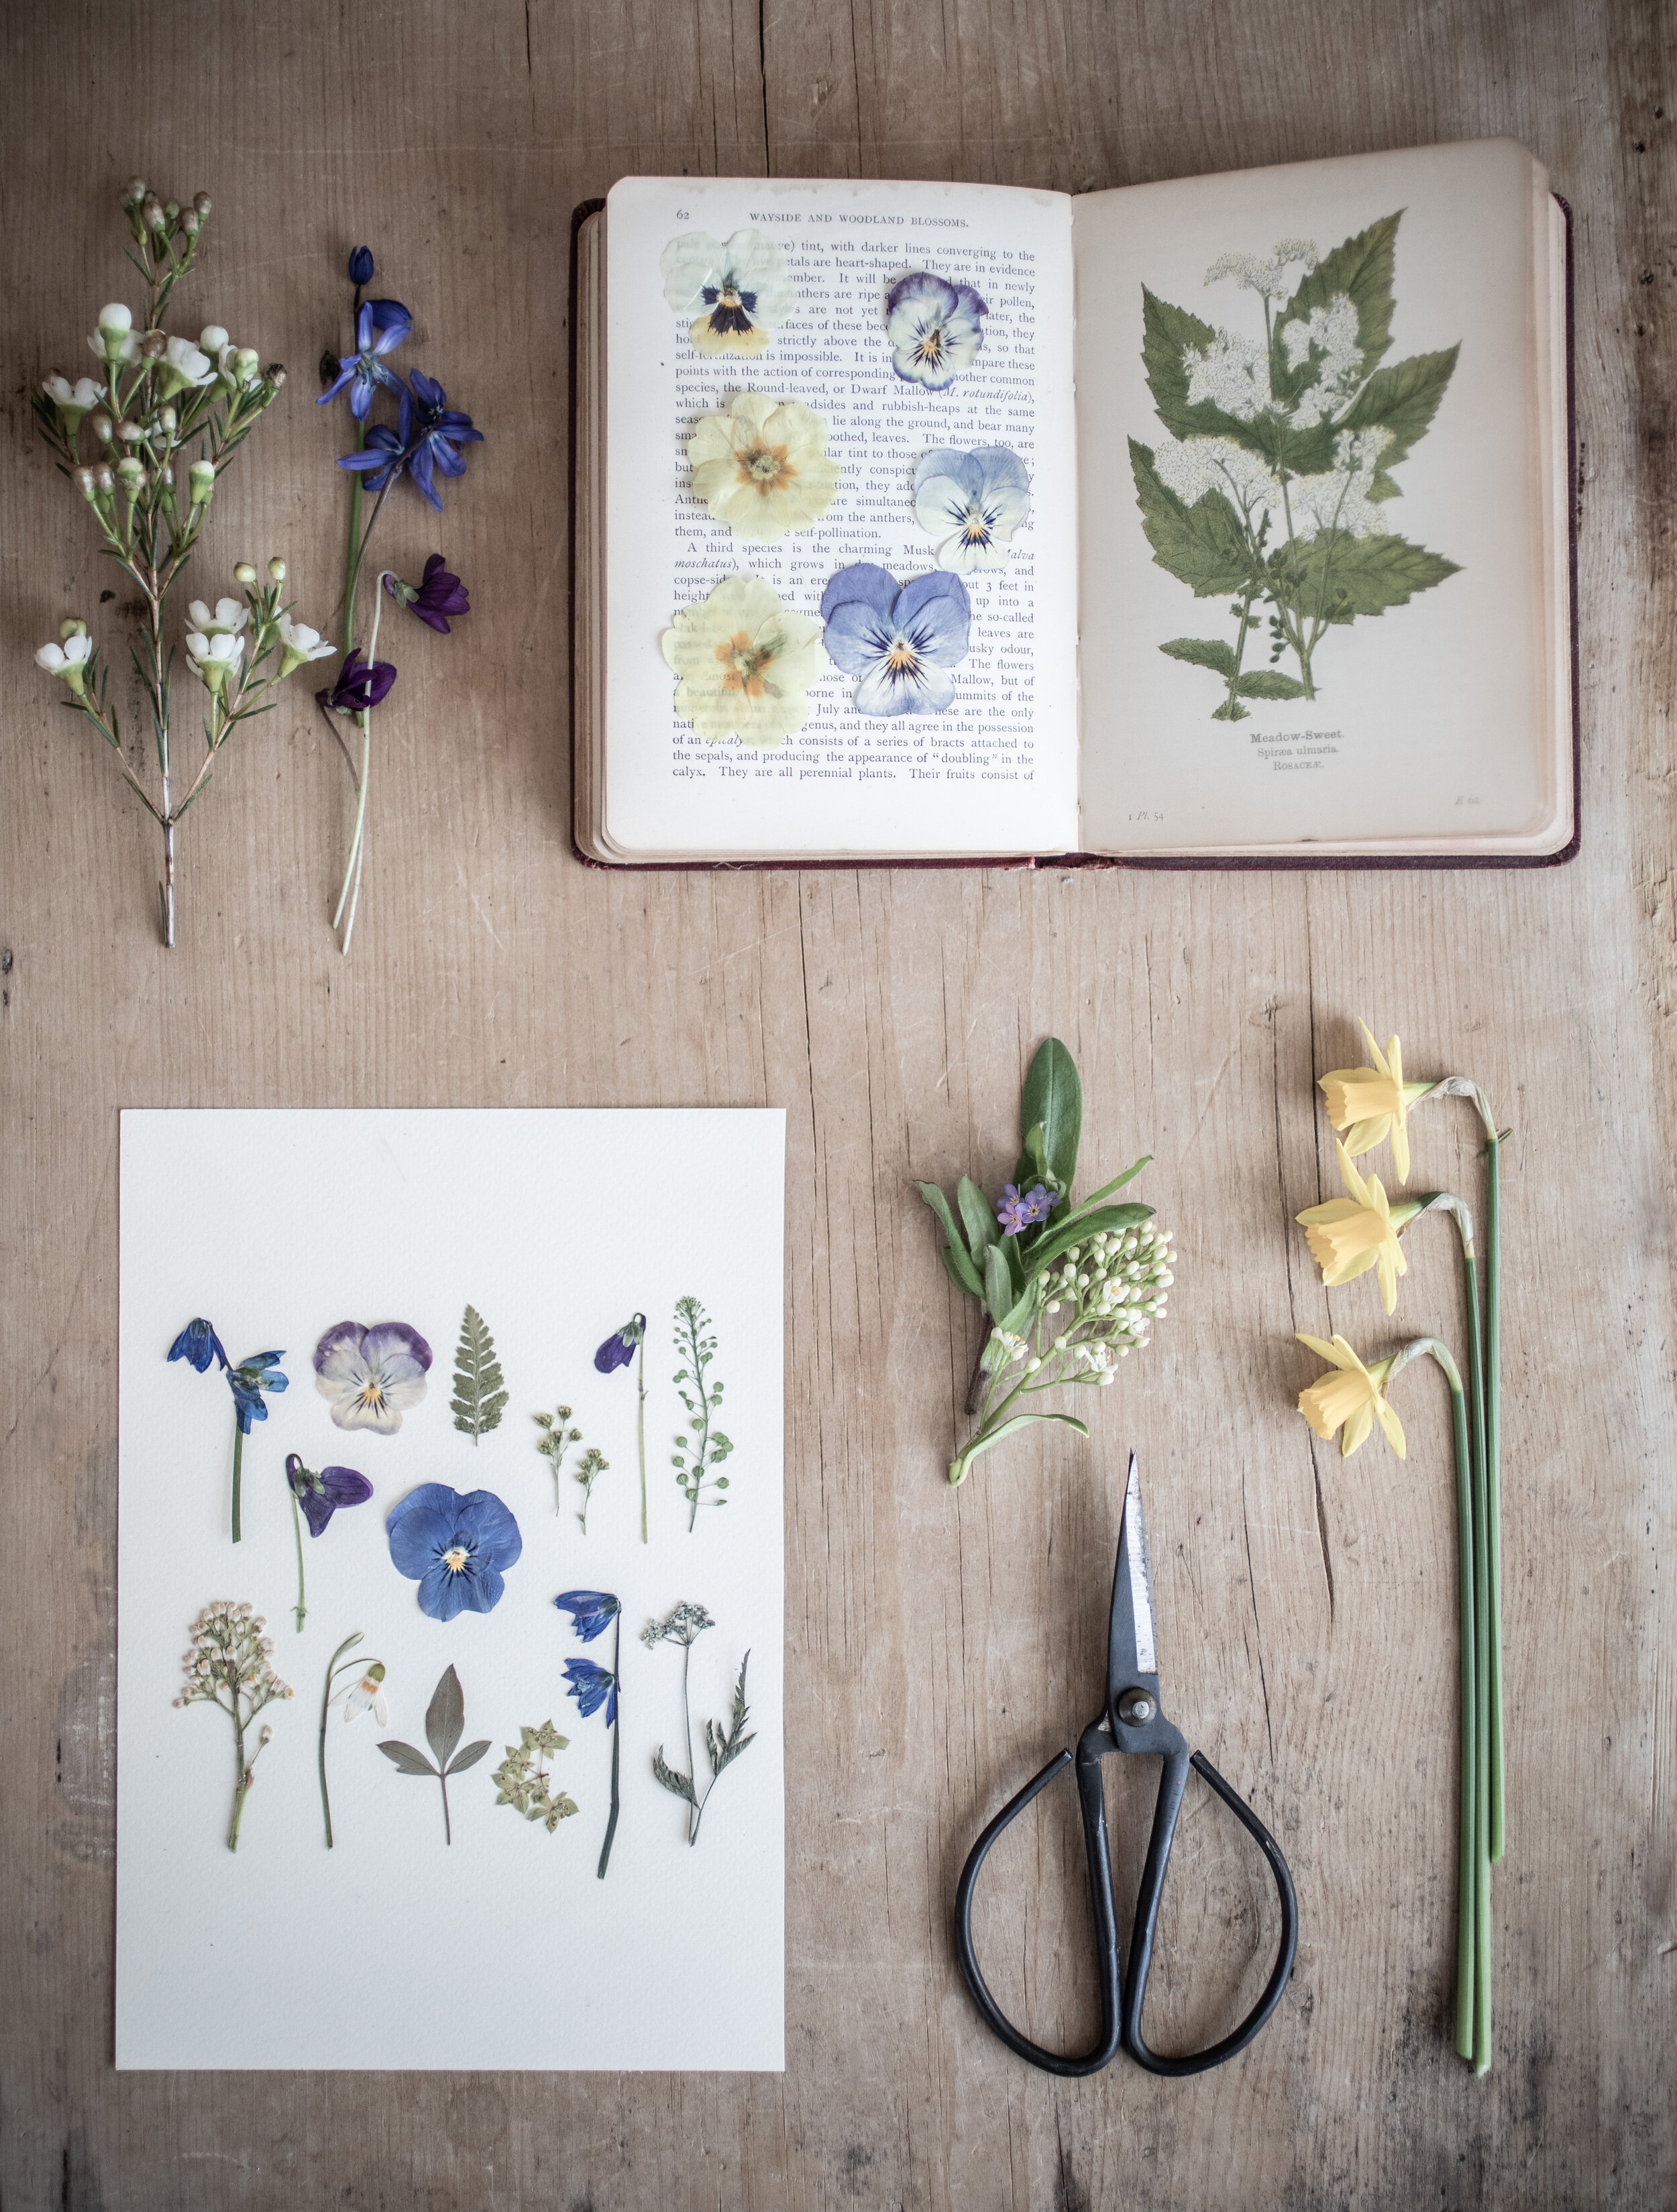 How To: Flower pressing